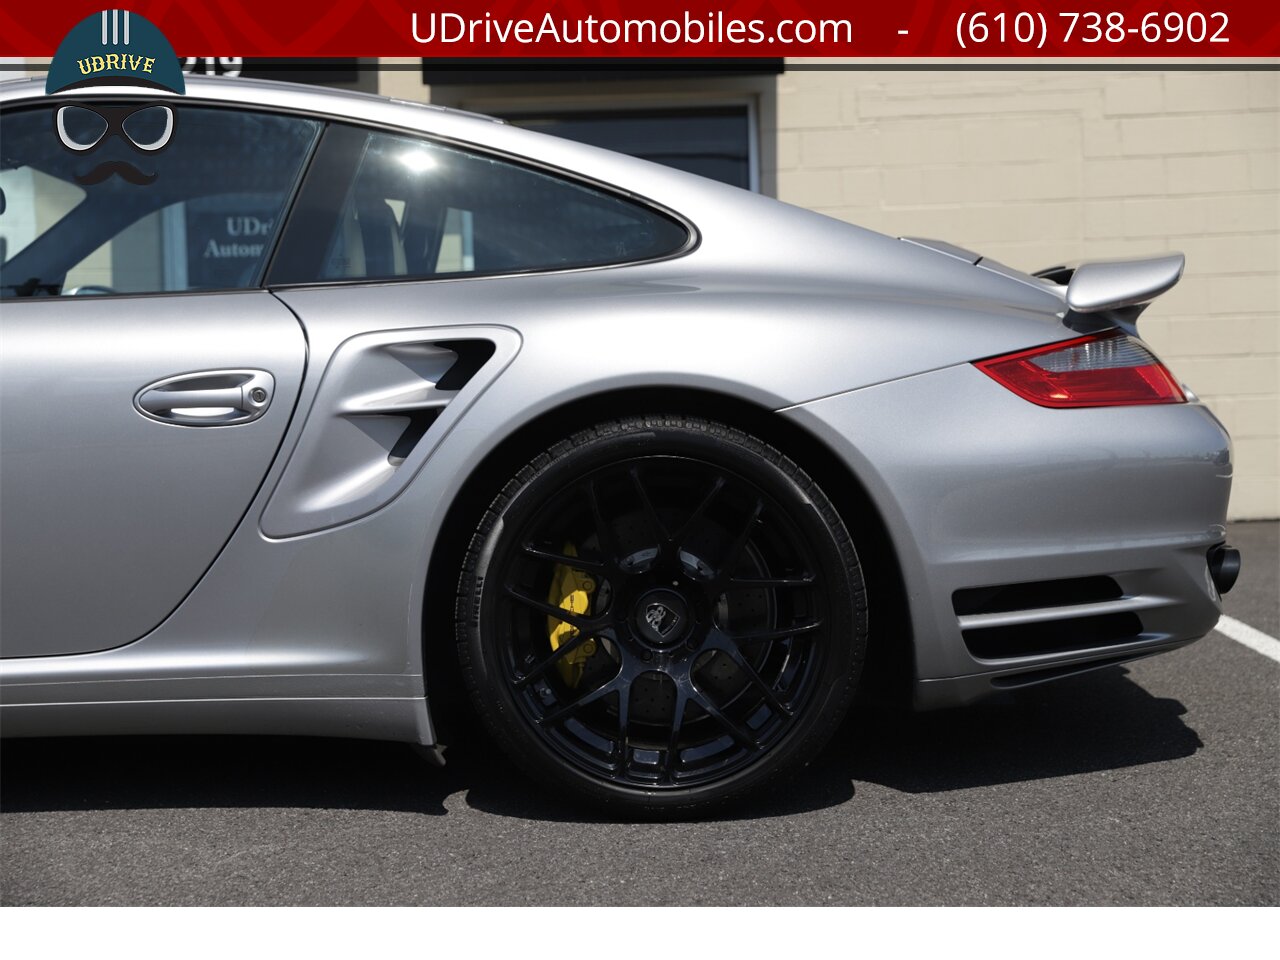 2008 Porsche 911 6 Speed Manual Turbo 997 PCCB's $149k MSRP   - Photo 23 - West Chester, PA 19382